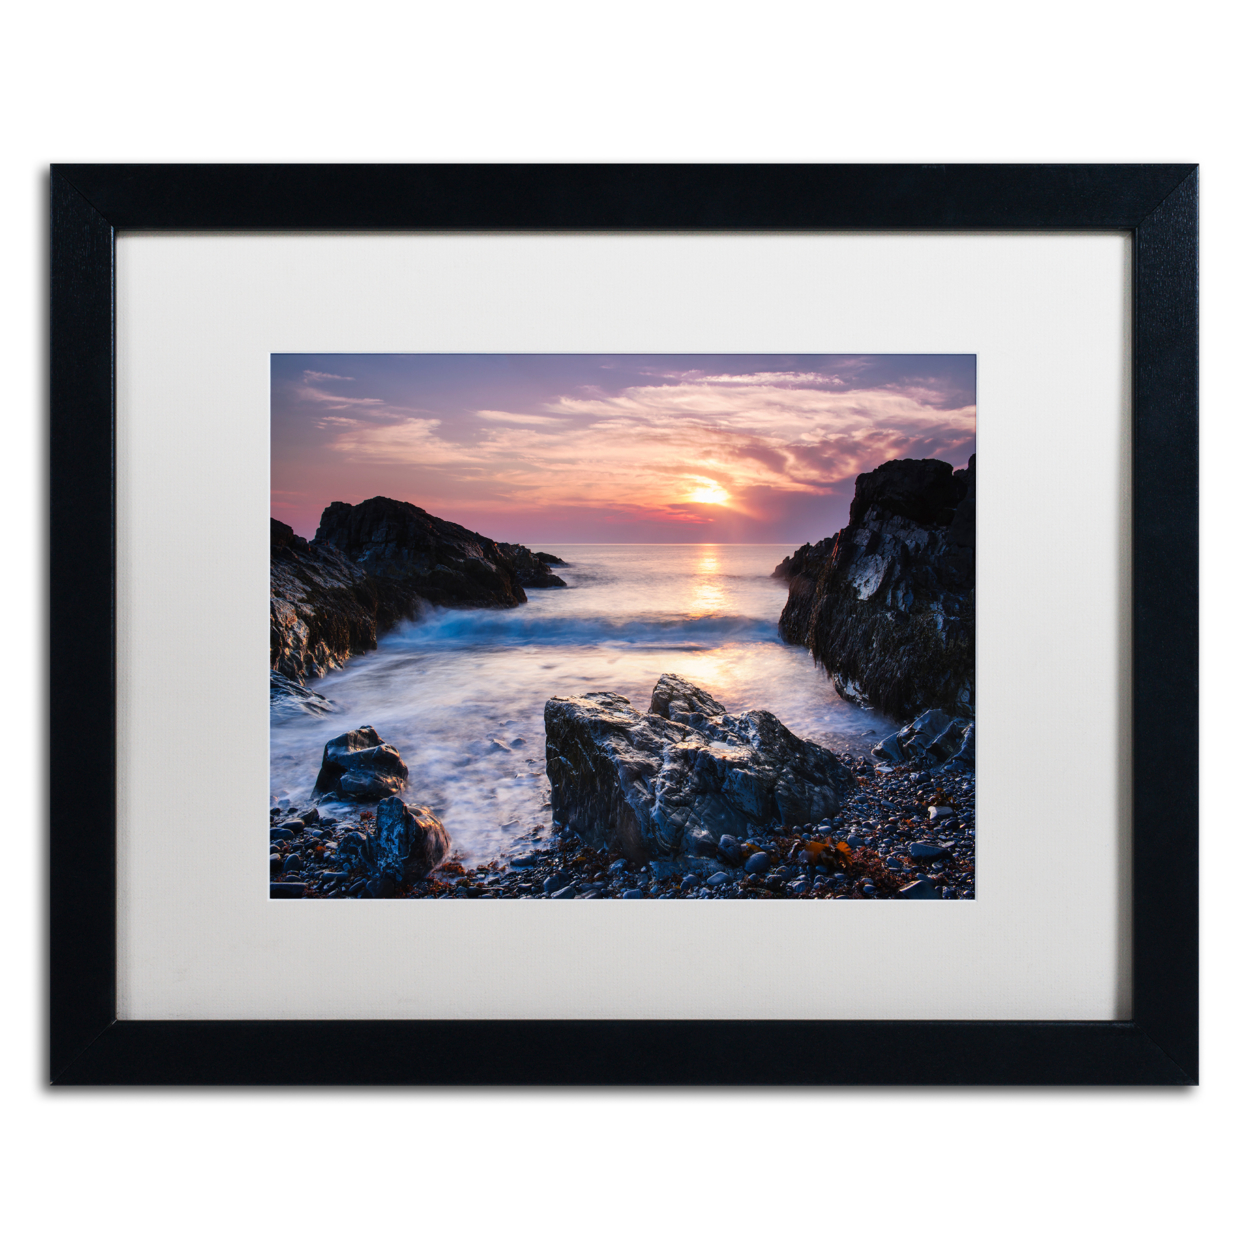 Michael Blanchette Photography 'Rocky Cove' Black Wooden Framed Art 18 X 22 Inches